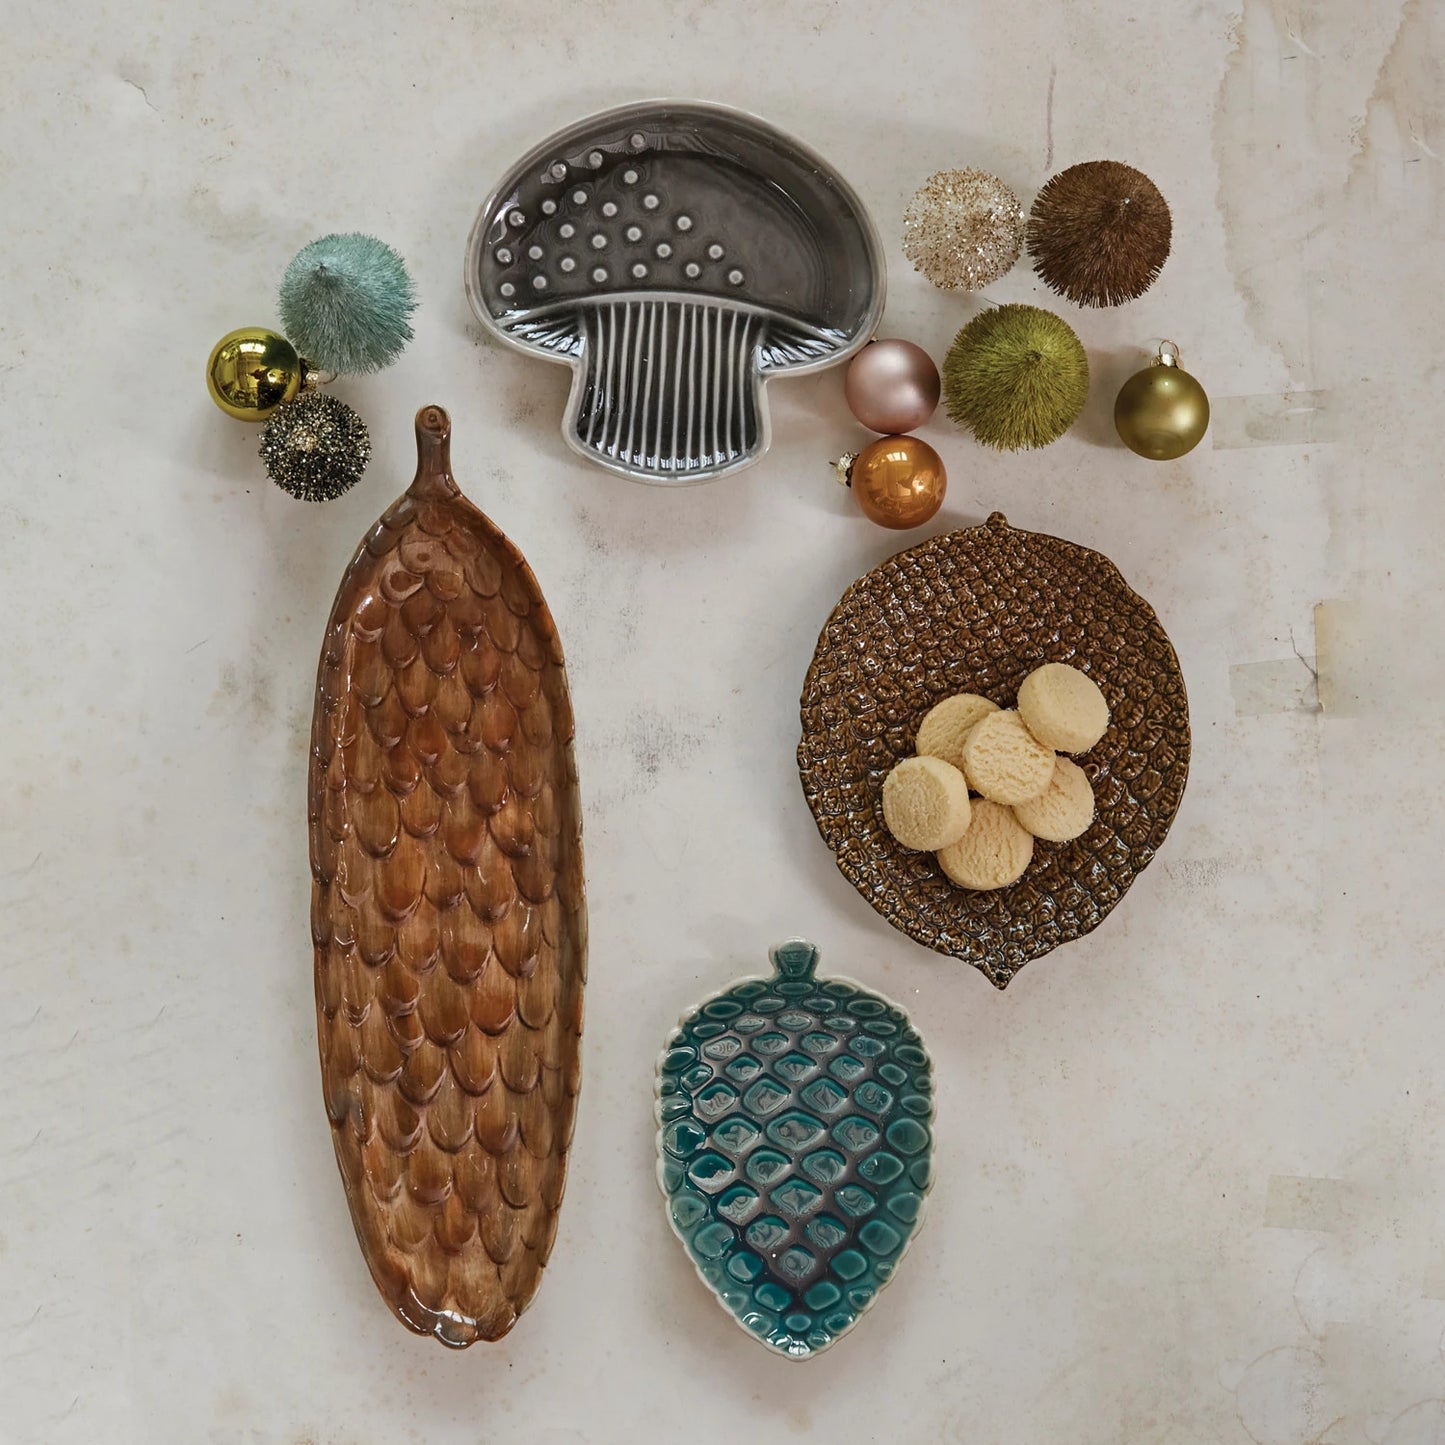 top view of the pinecone shaped stoneware cracker dish displayed next to two othe pinecone shaped dishes and a mushroom shaped dish, bottle brush trees and ornaments